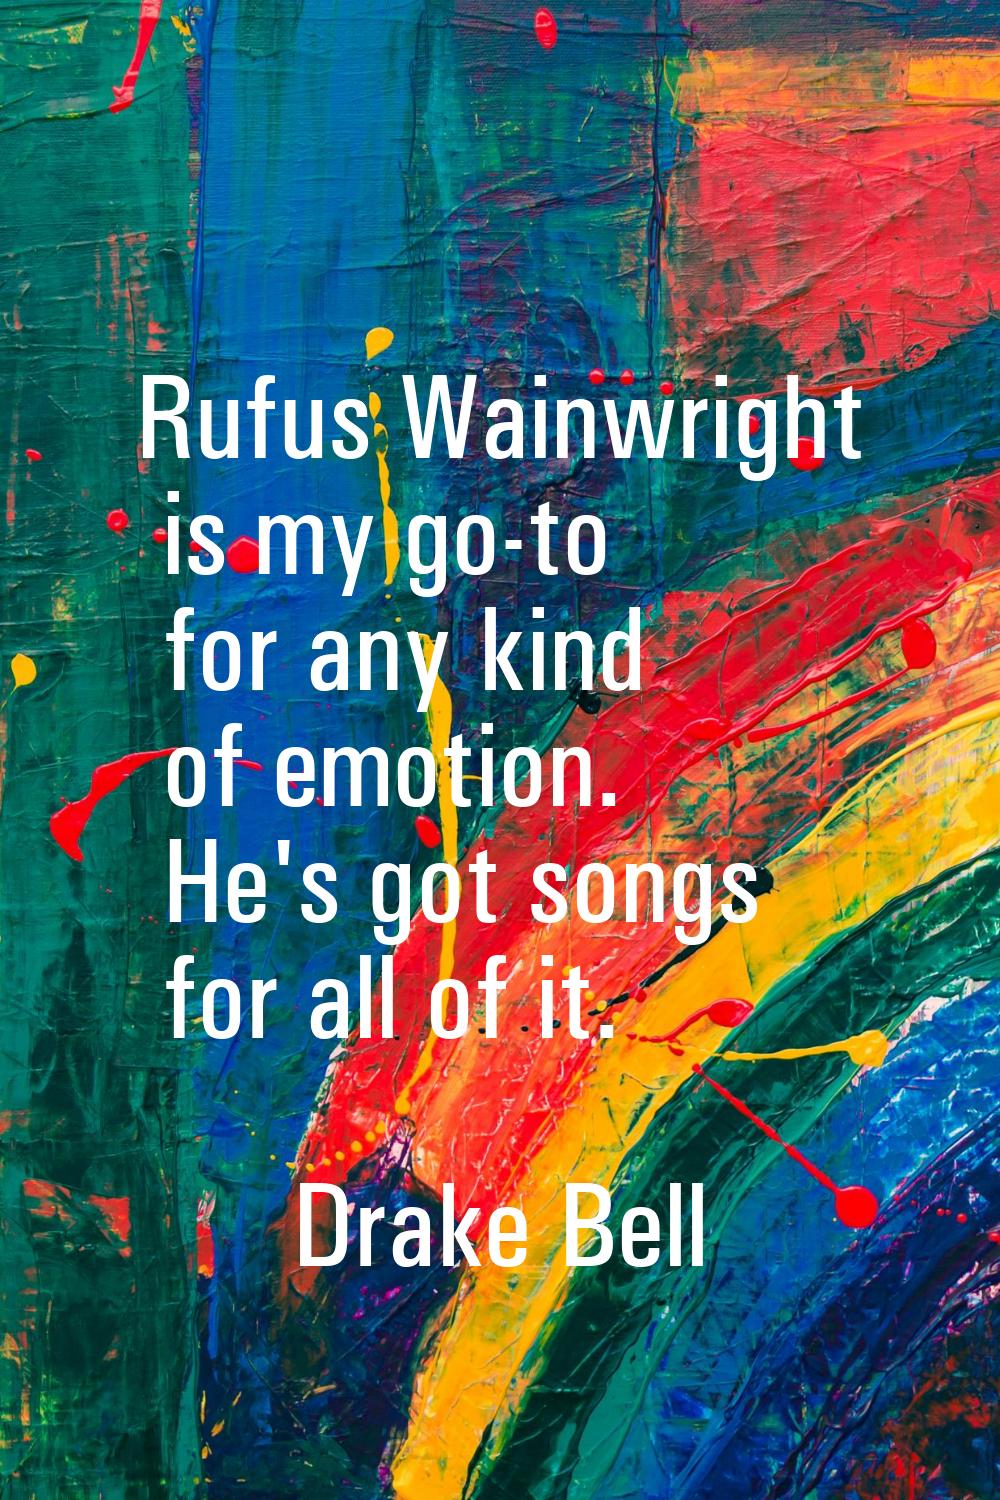 Rufus Wainwright is my go-to for any kind of emotion. He's got songs for all of it.